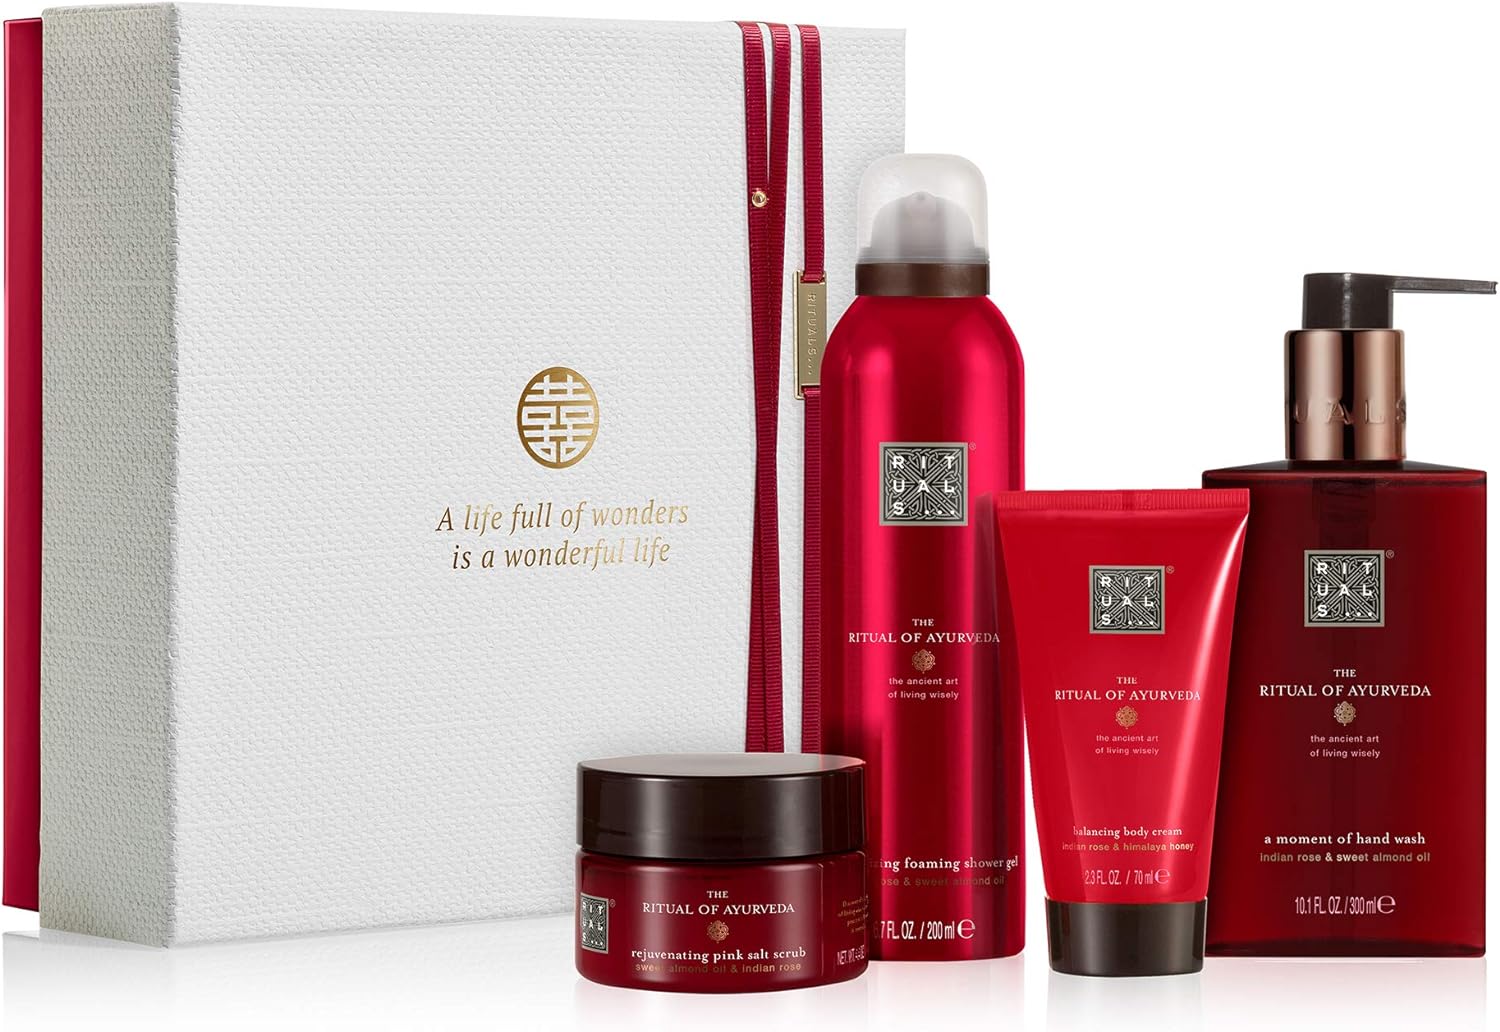 A photo of a gift set of Rituals products with a red background. The text on the box reads: 'A life full of wonders is a wonderful life'. The products in the set include a foaming shower gel, a body scrub, a hand wash, and a body cream.